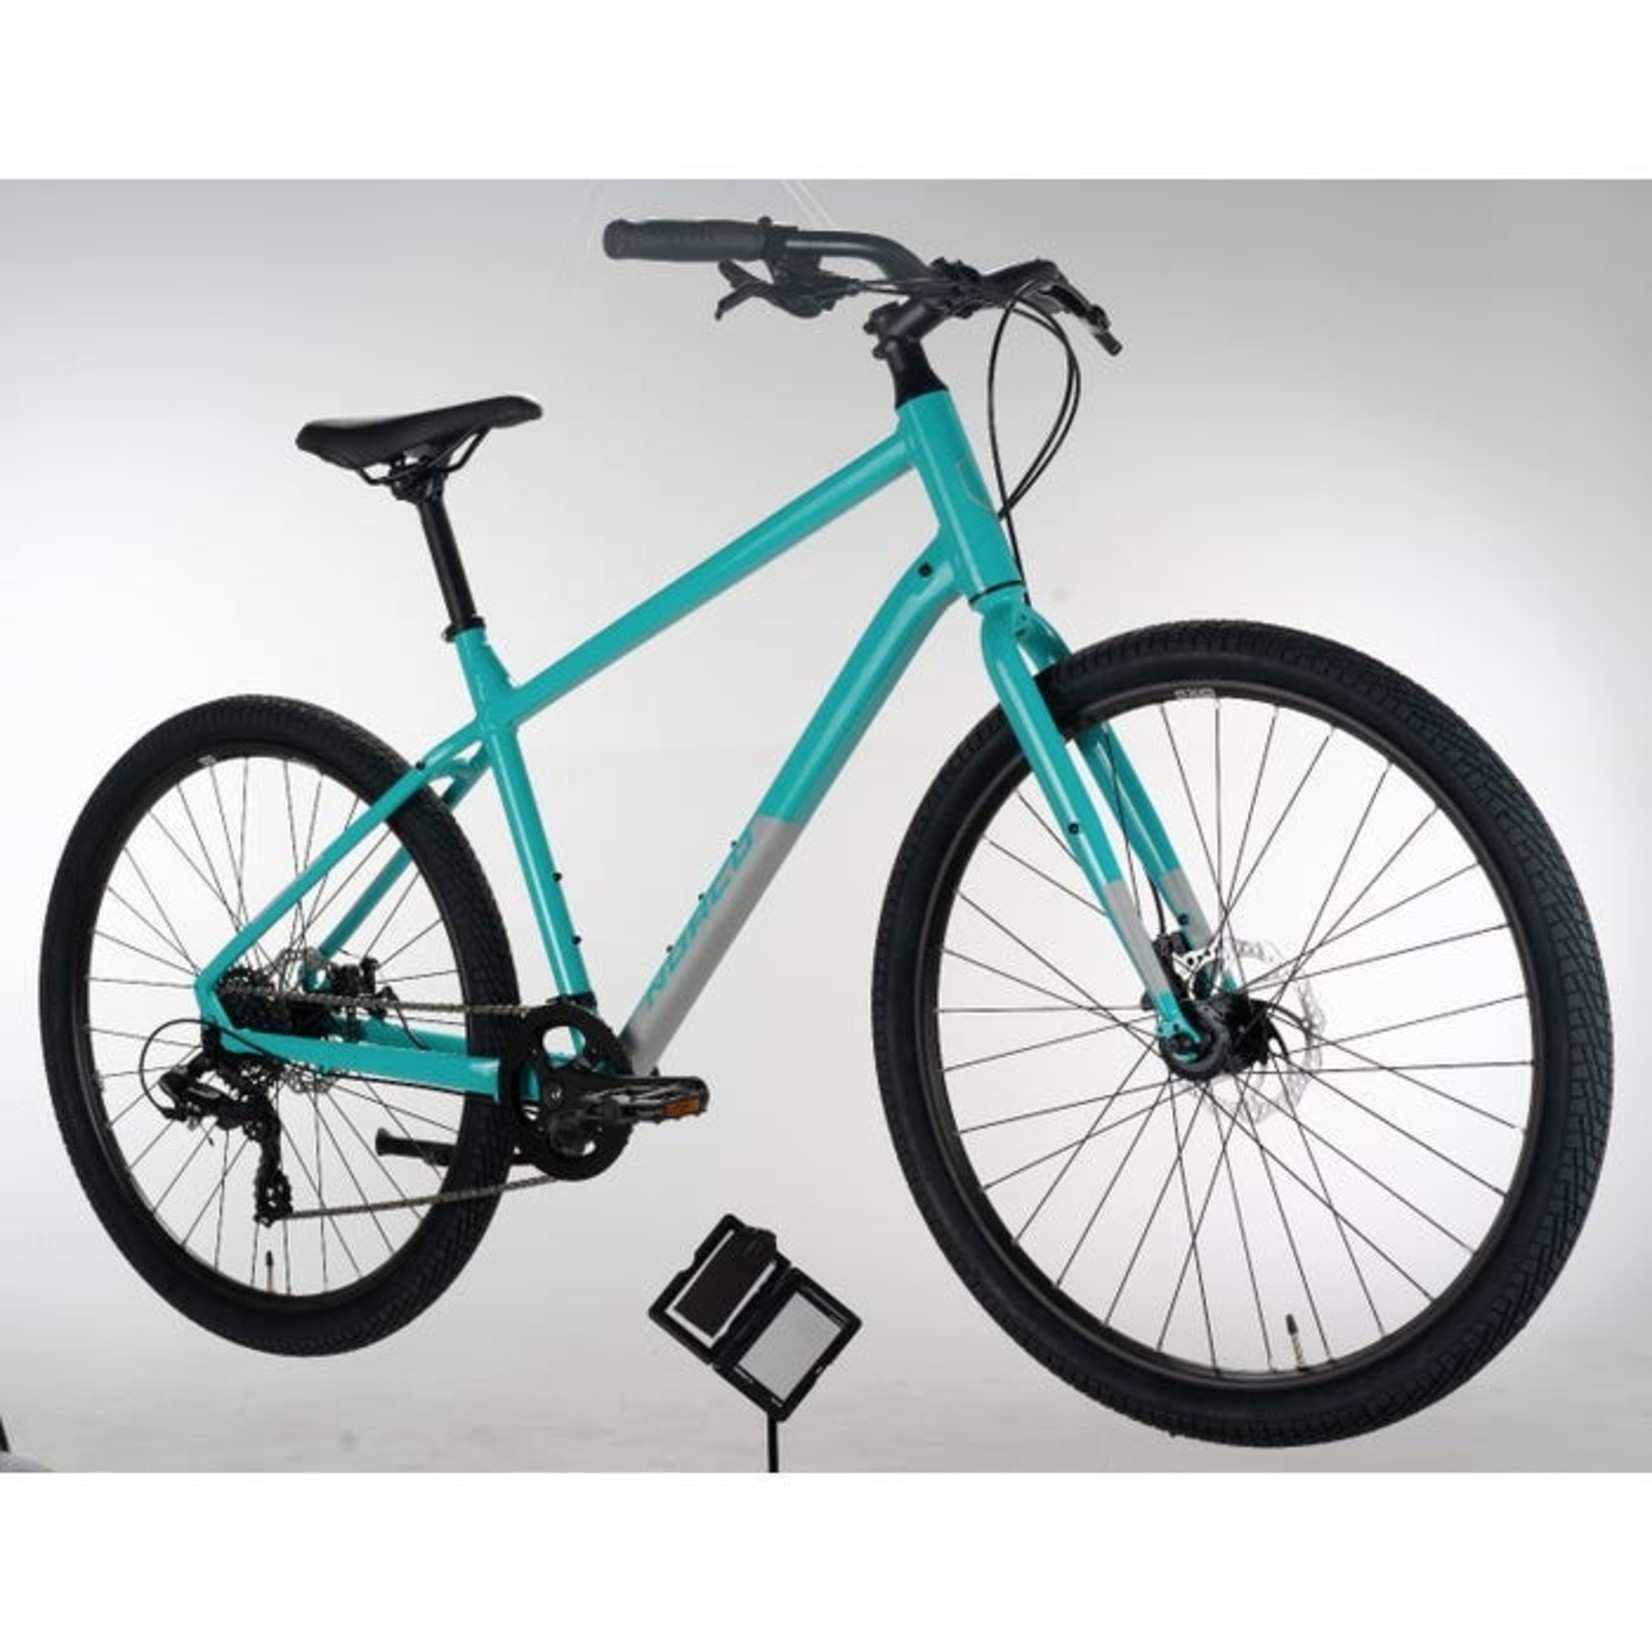 Norco Norco 2021 Indie 4 Women's Hybrid Bike - Blue/Silver - Small